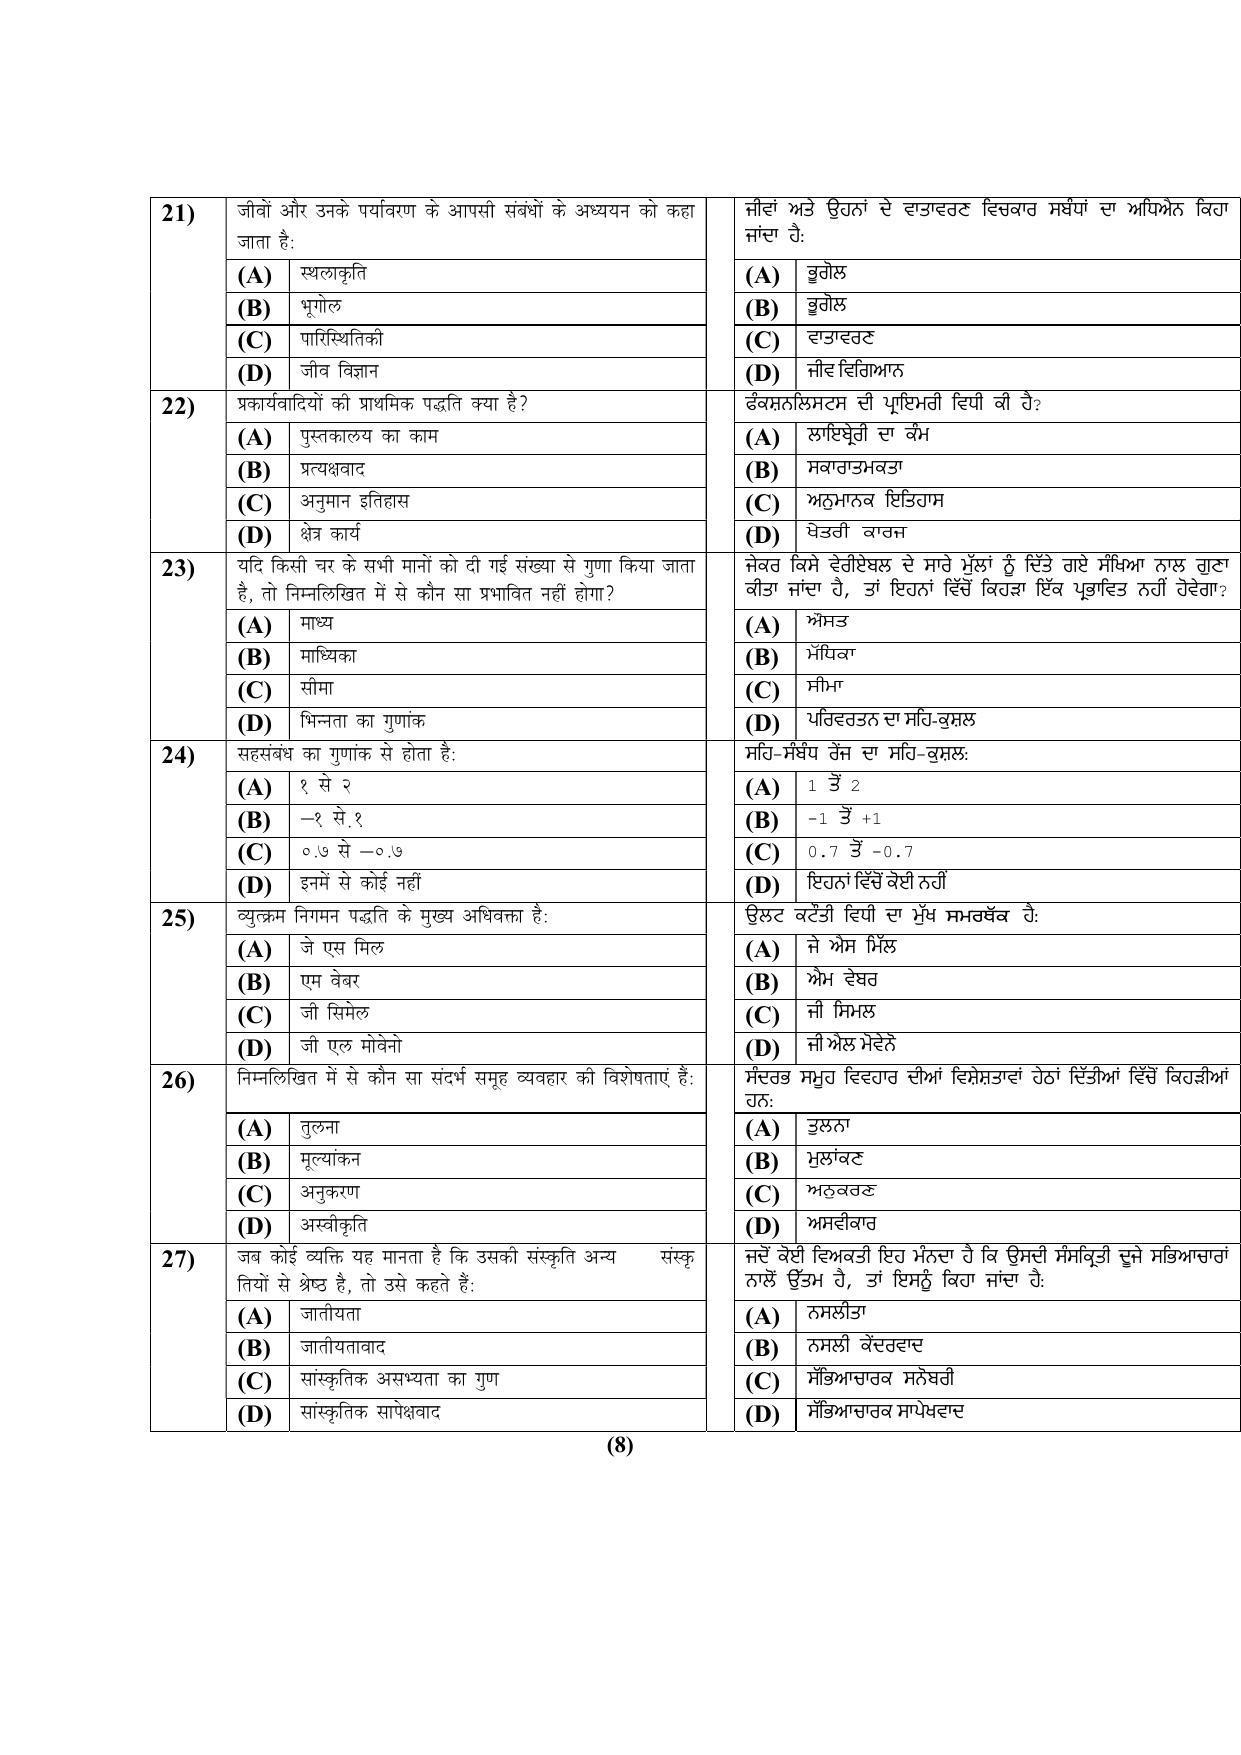 PU MPET Ancient Indian History & Archeology 2022 Question Papers - Page 65